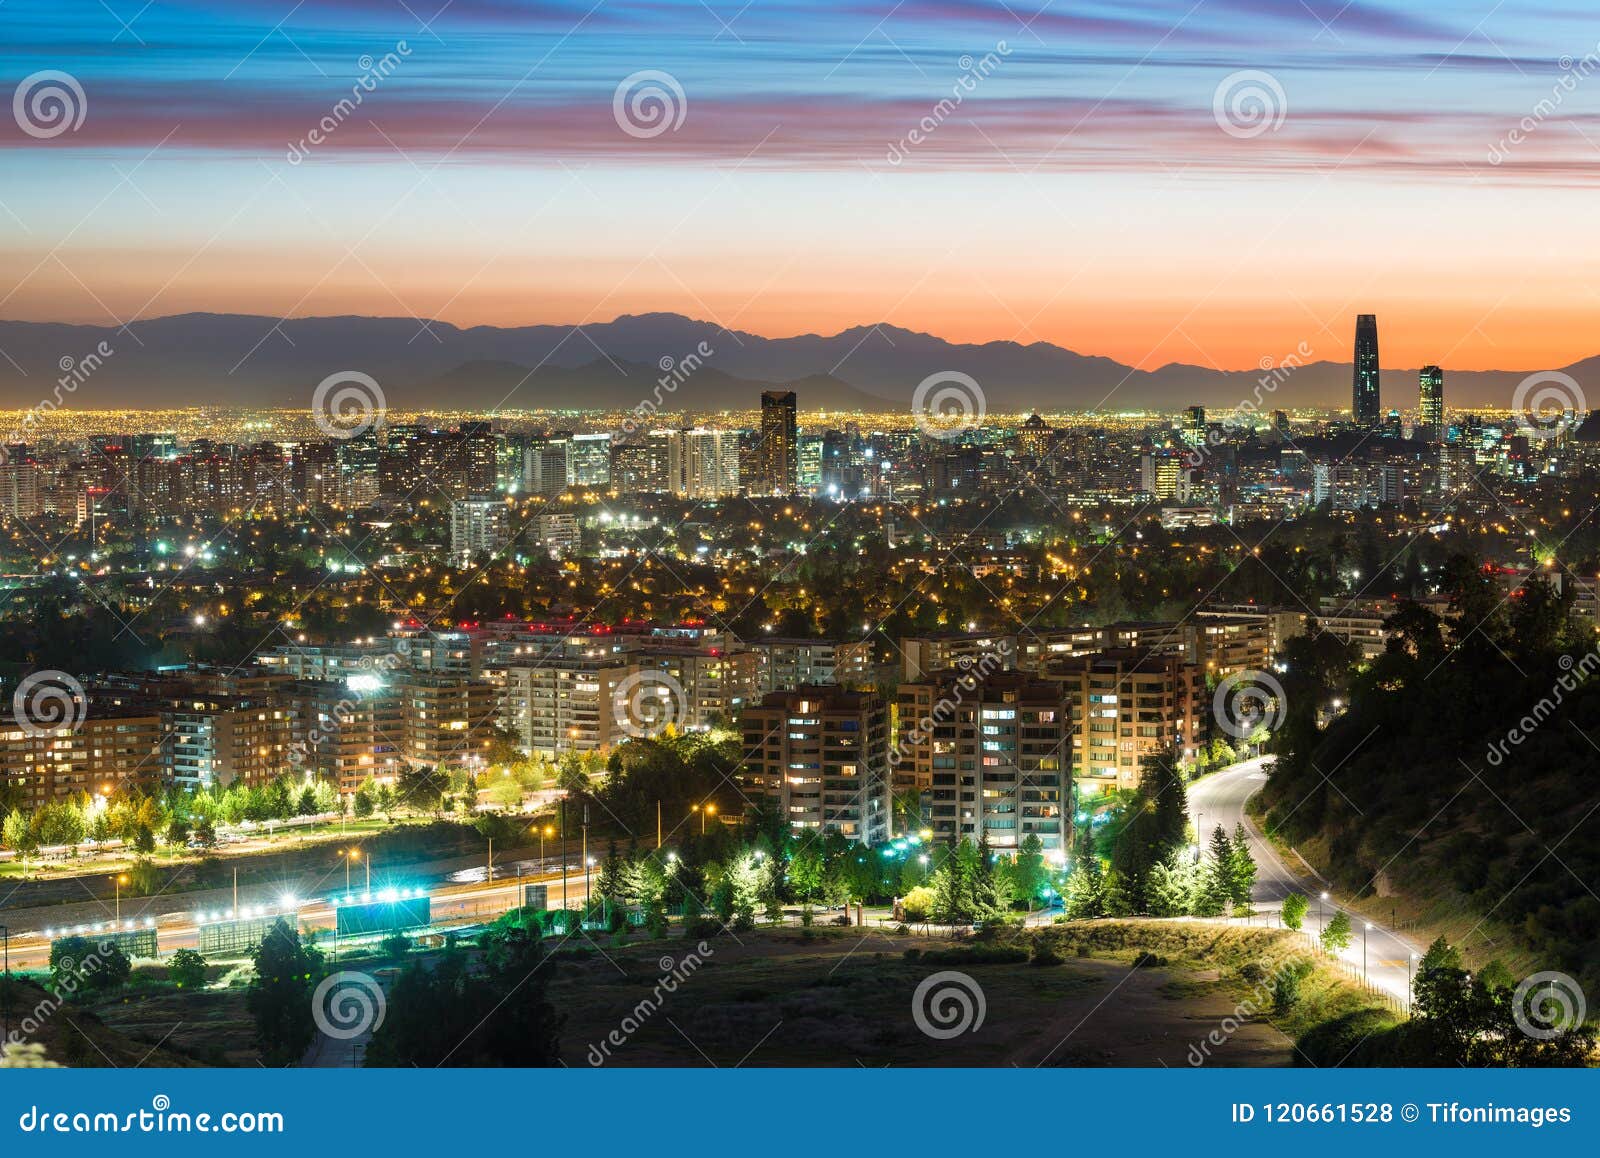 panoramic view of santiago de chile with las condes and vitacura districts